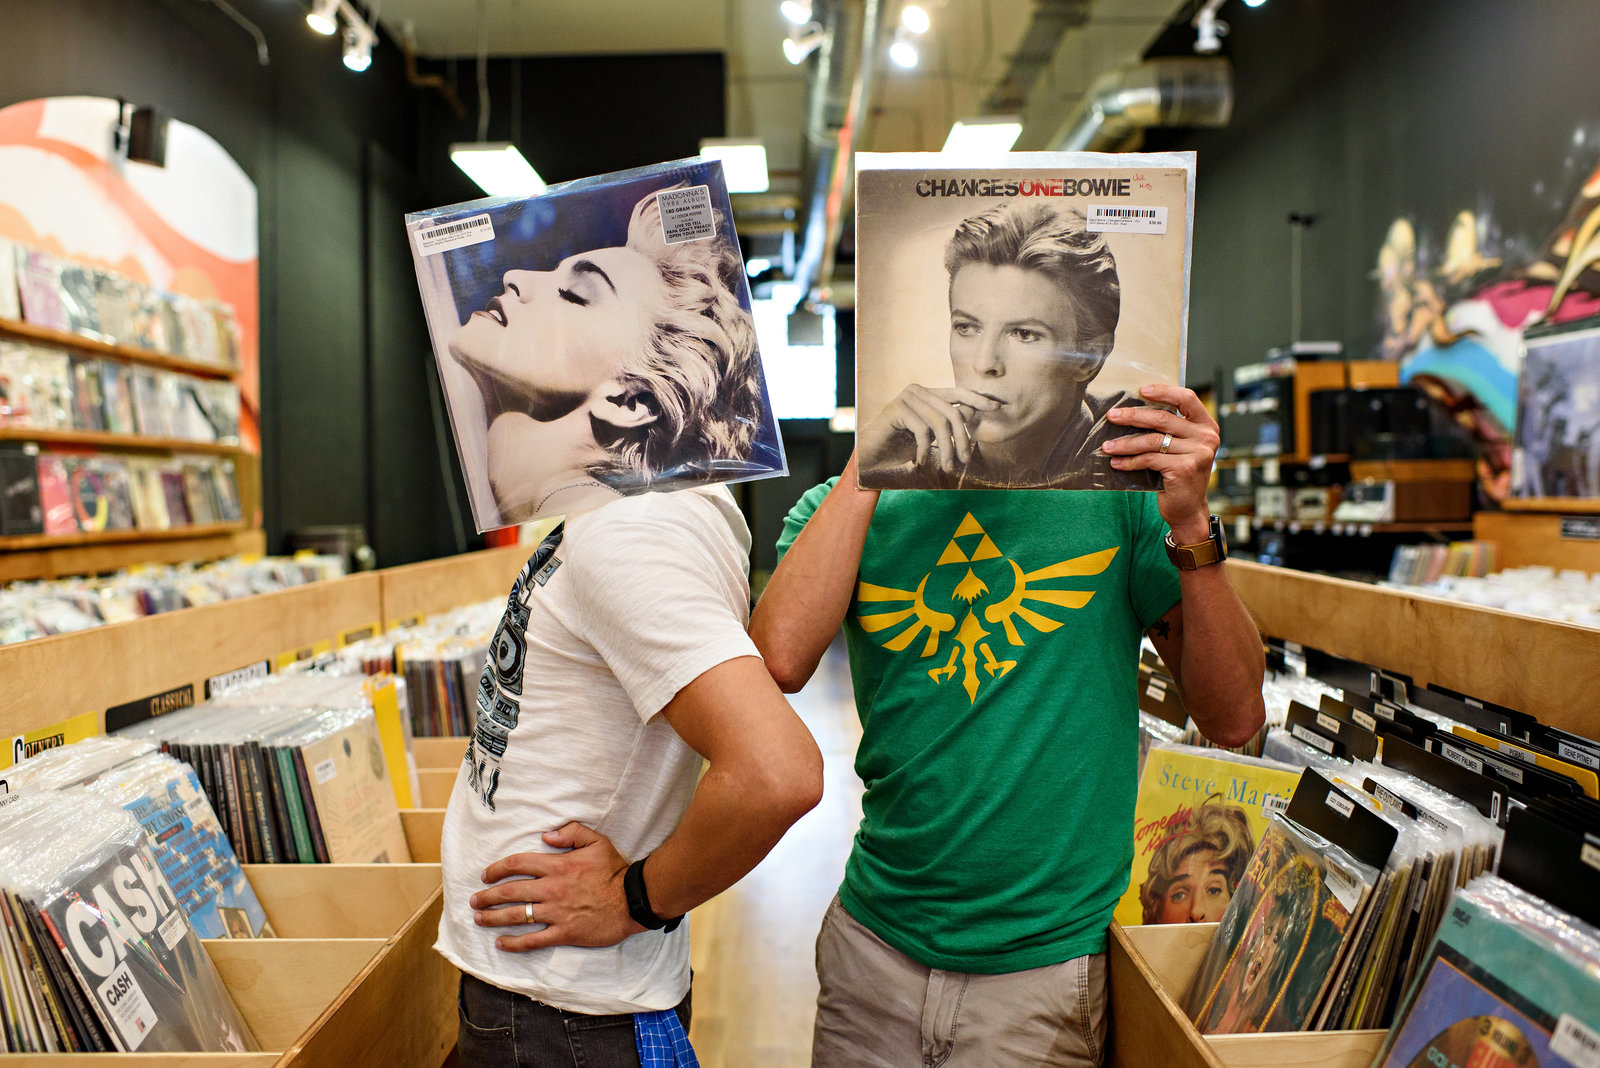 An engaged couple have fun in a chicago record store.